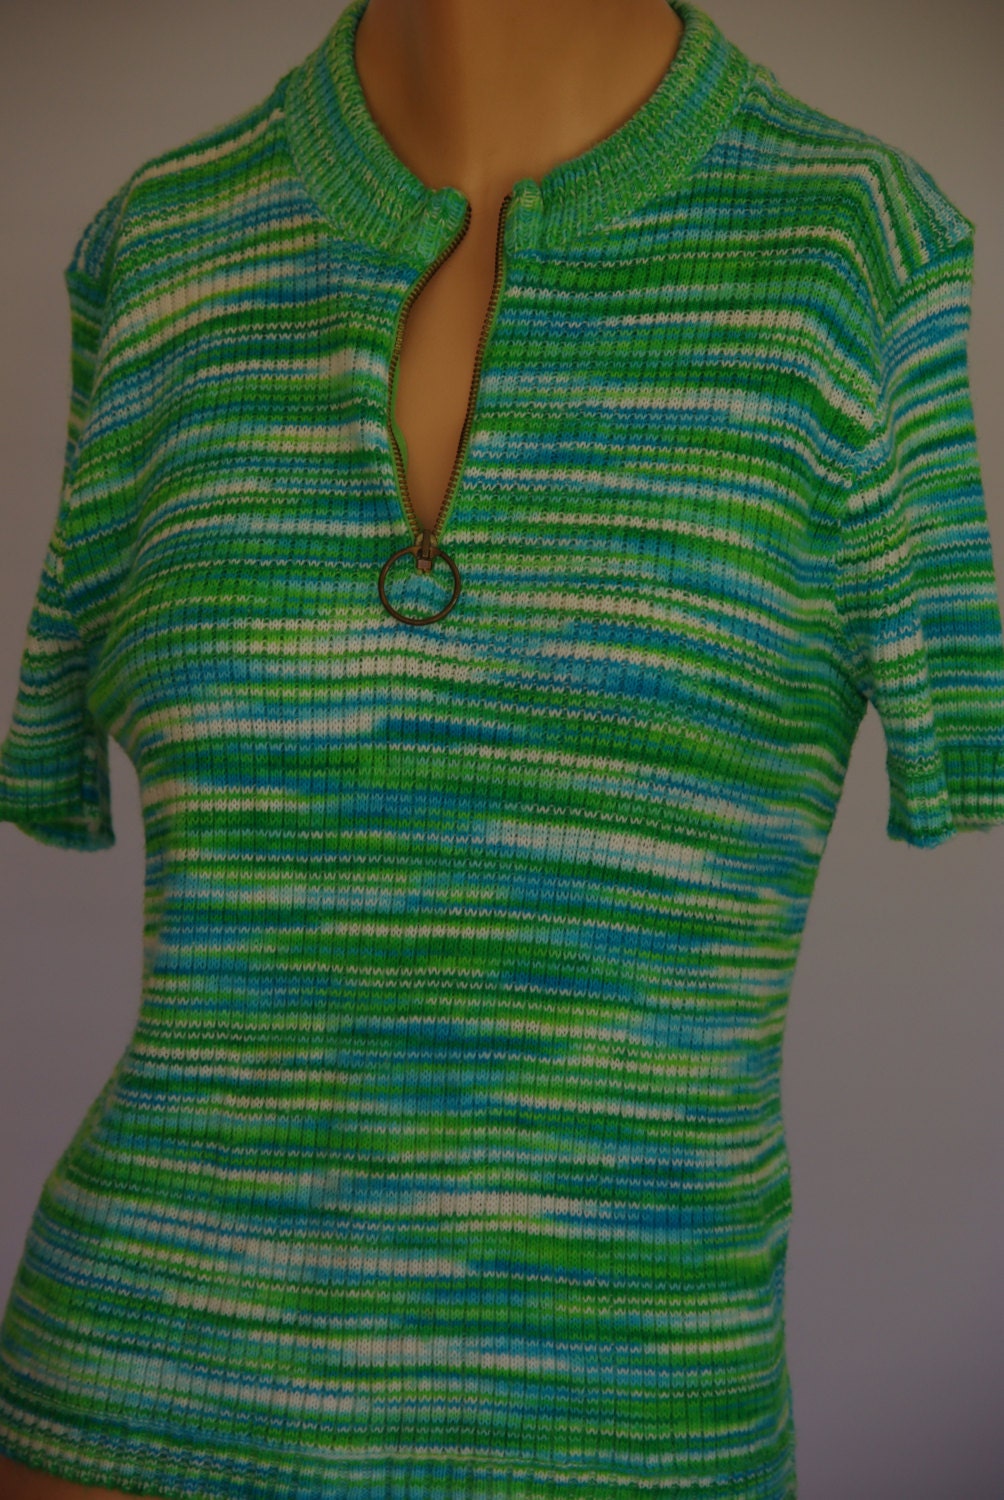 Cute green and blue 1970s short sleeve summer knit top